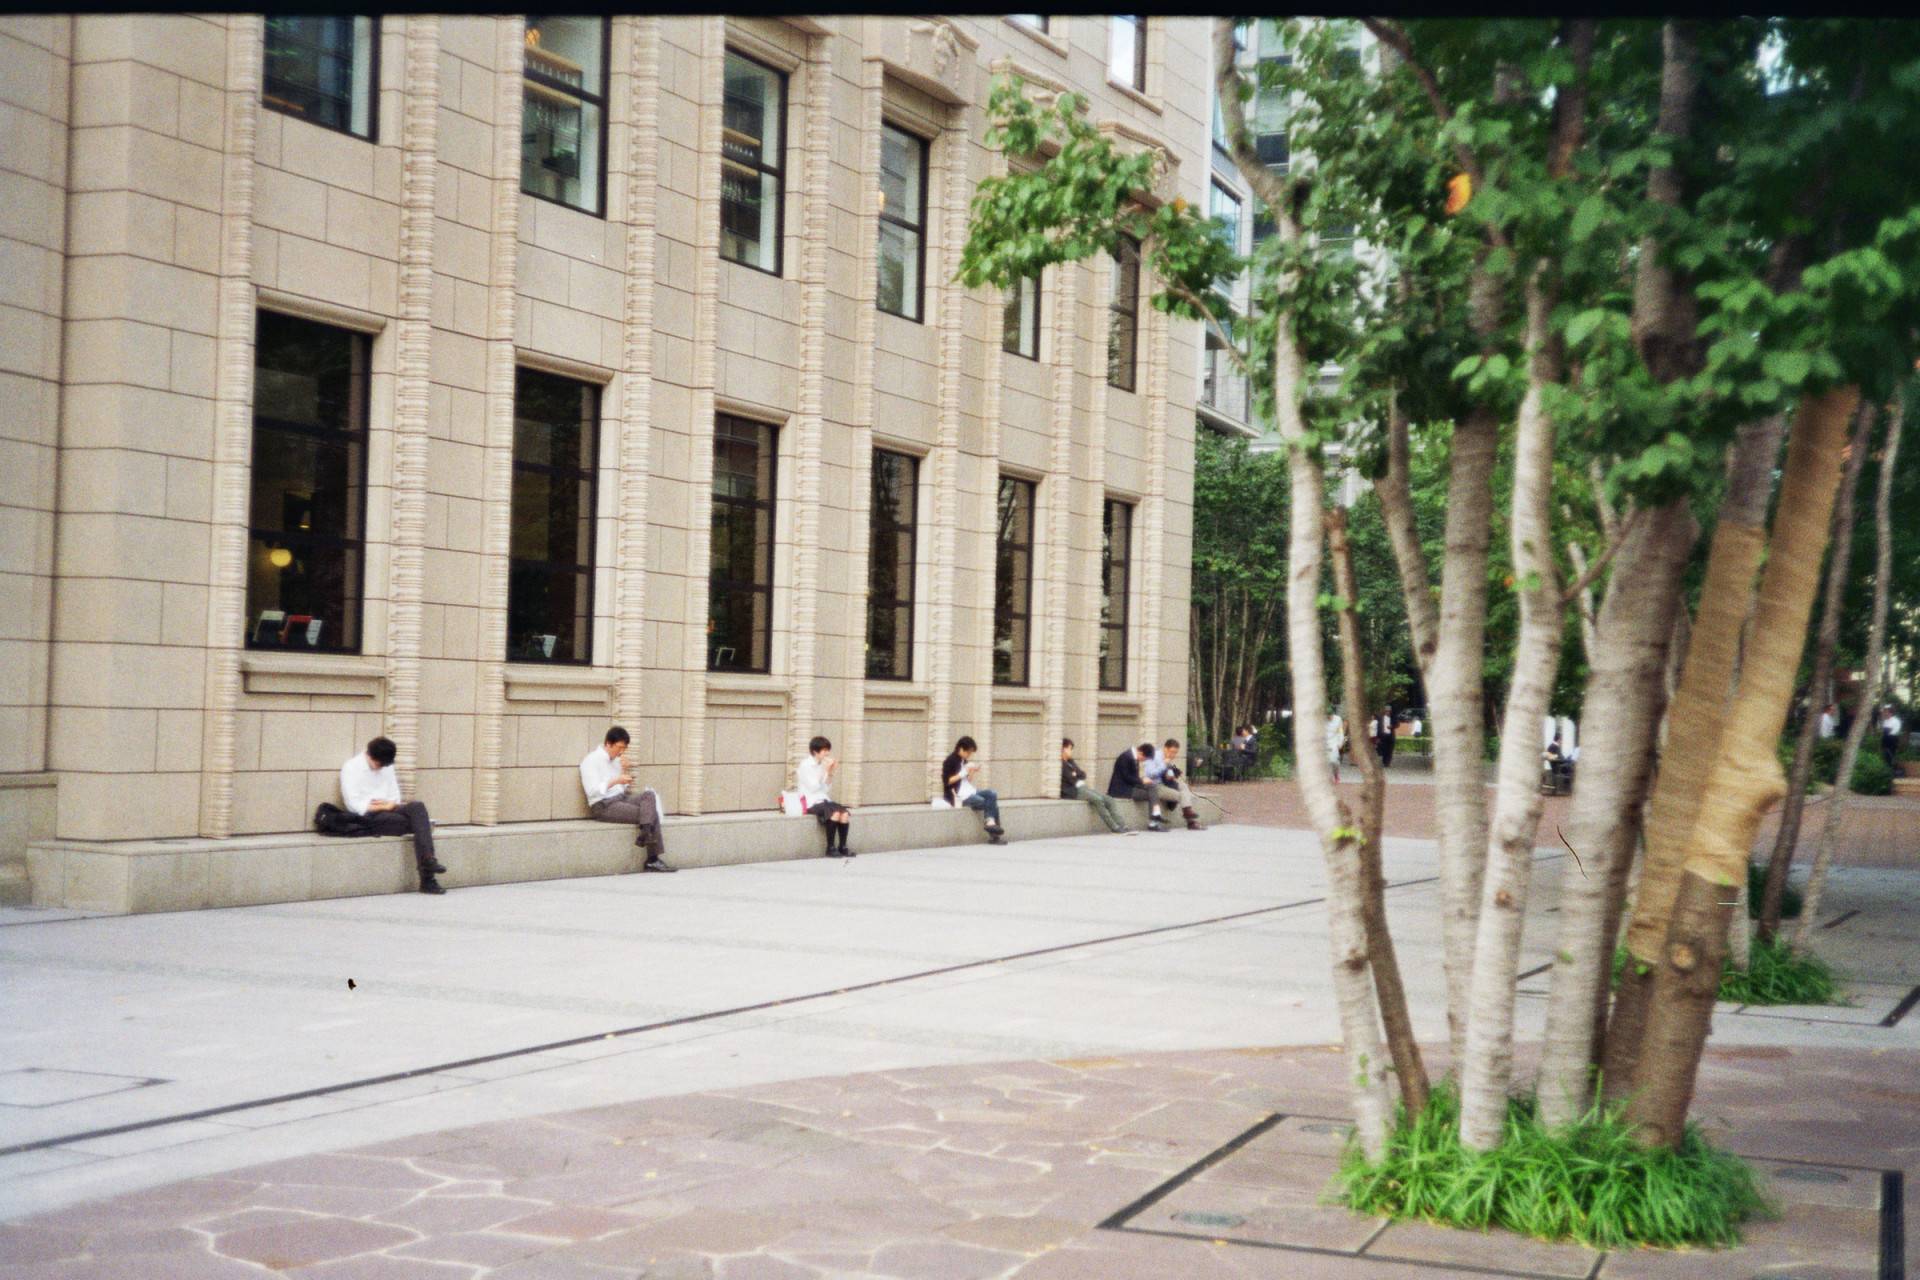 people sitting next to a building and eating their lunch, they sit almost equidistant from each other, a person below each window of the building